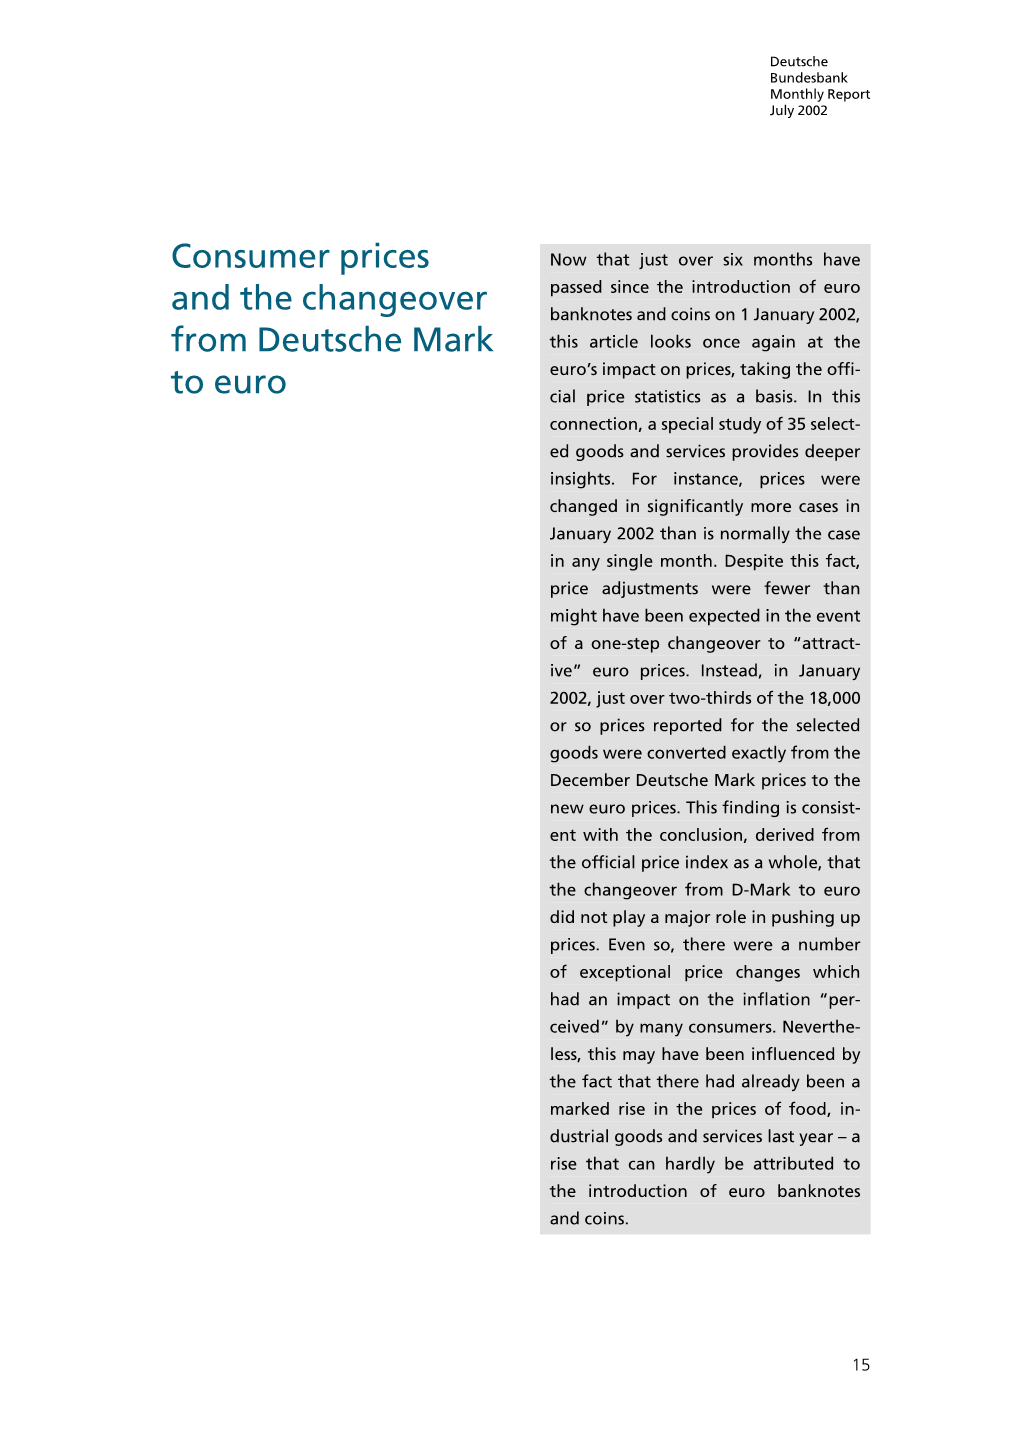 Consumer Prices and the Changeover from Deutsche Mark to Euro